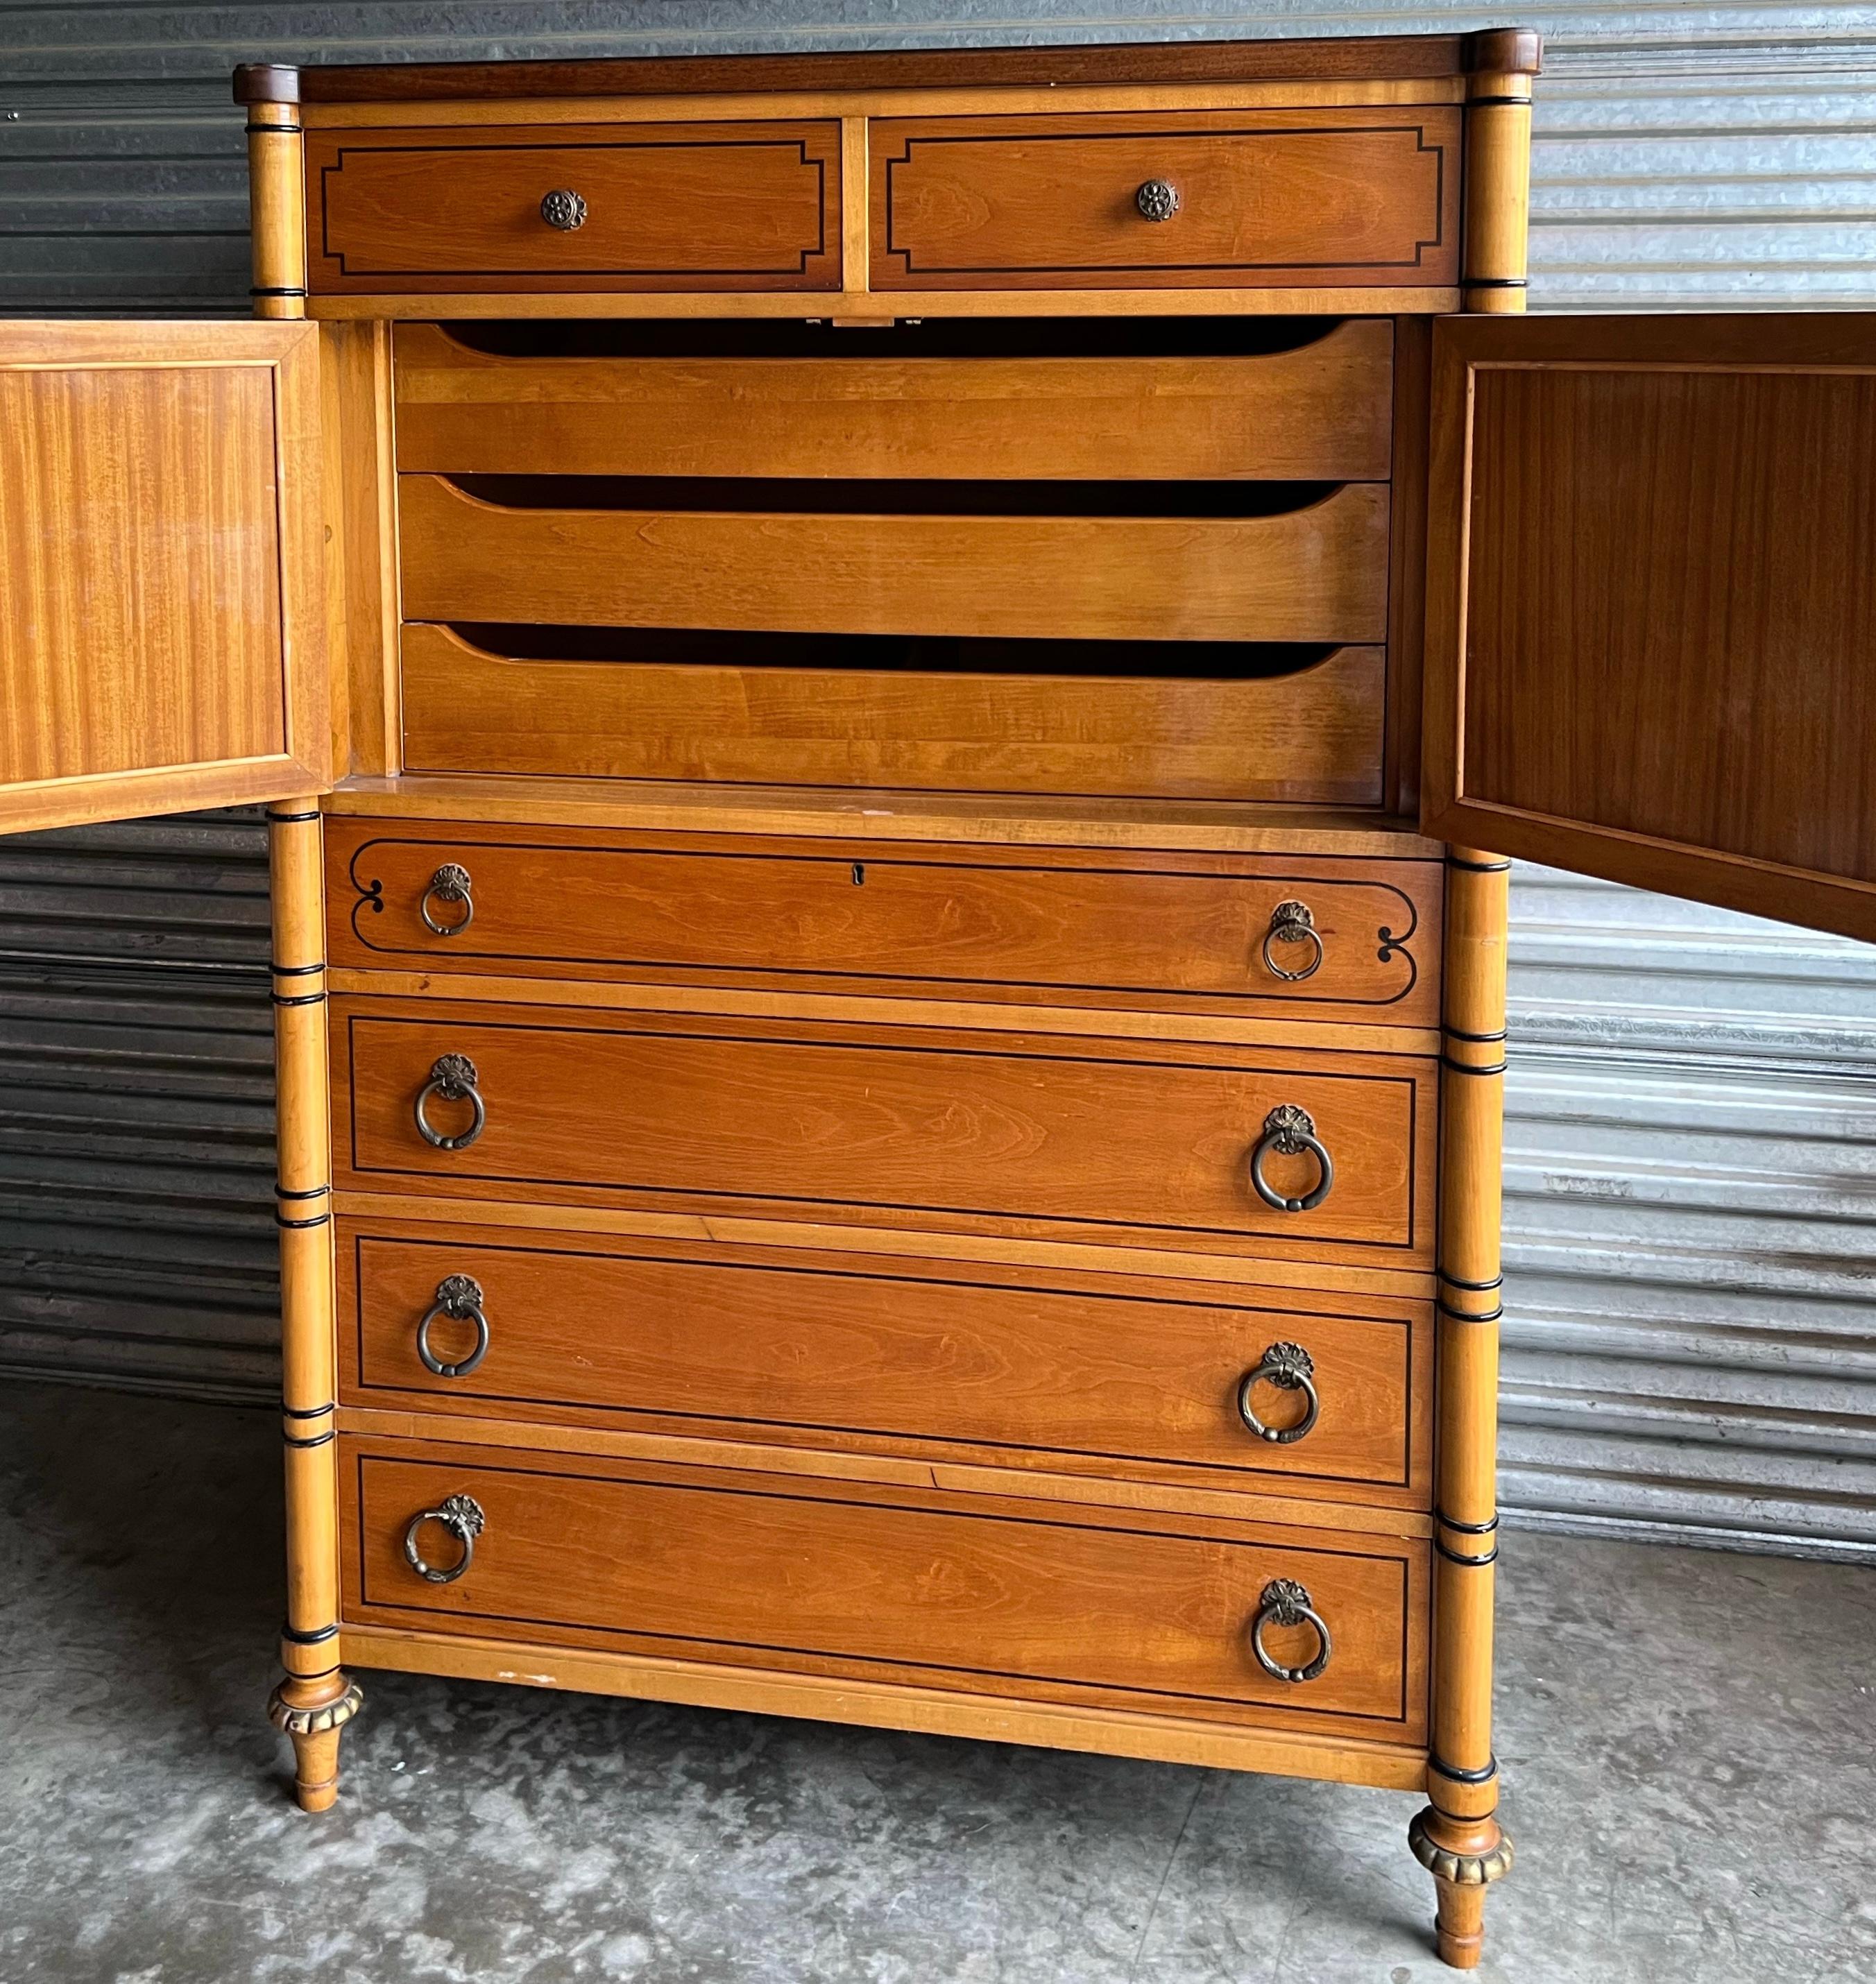 1940s French Regency Style Faux Bamboo Inspired Tall Maple Chest of Drawers In Good Condition For Sale In Kennesaw, GA